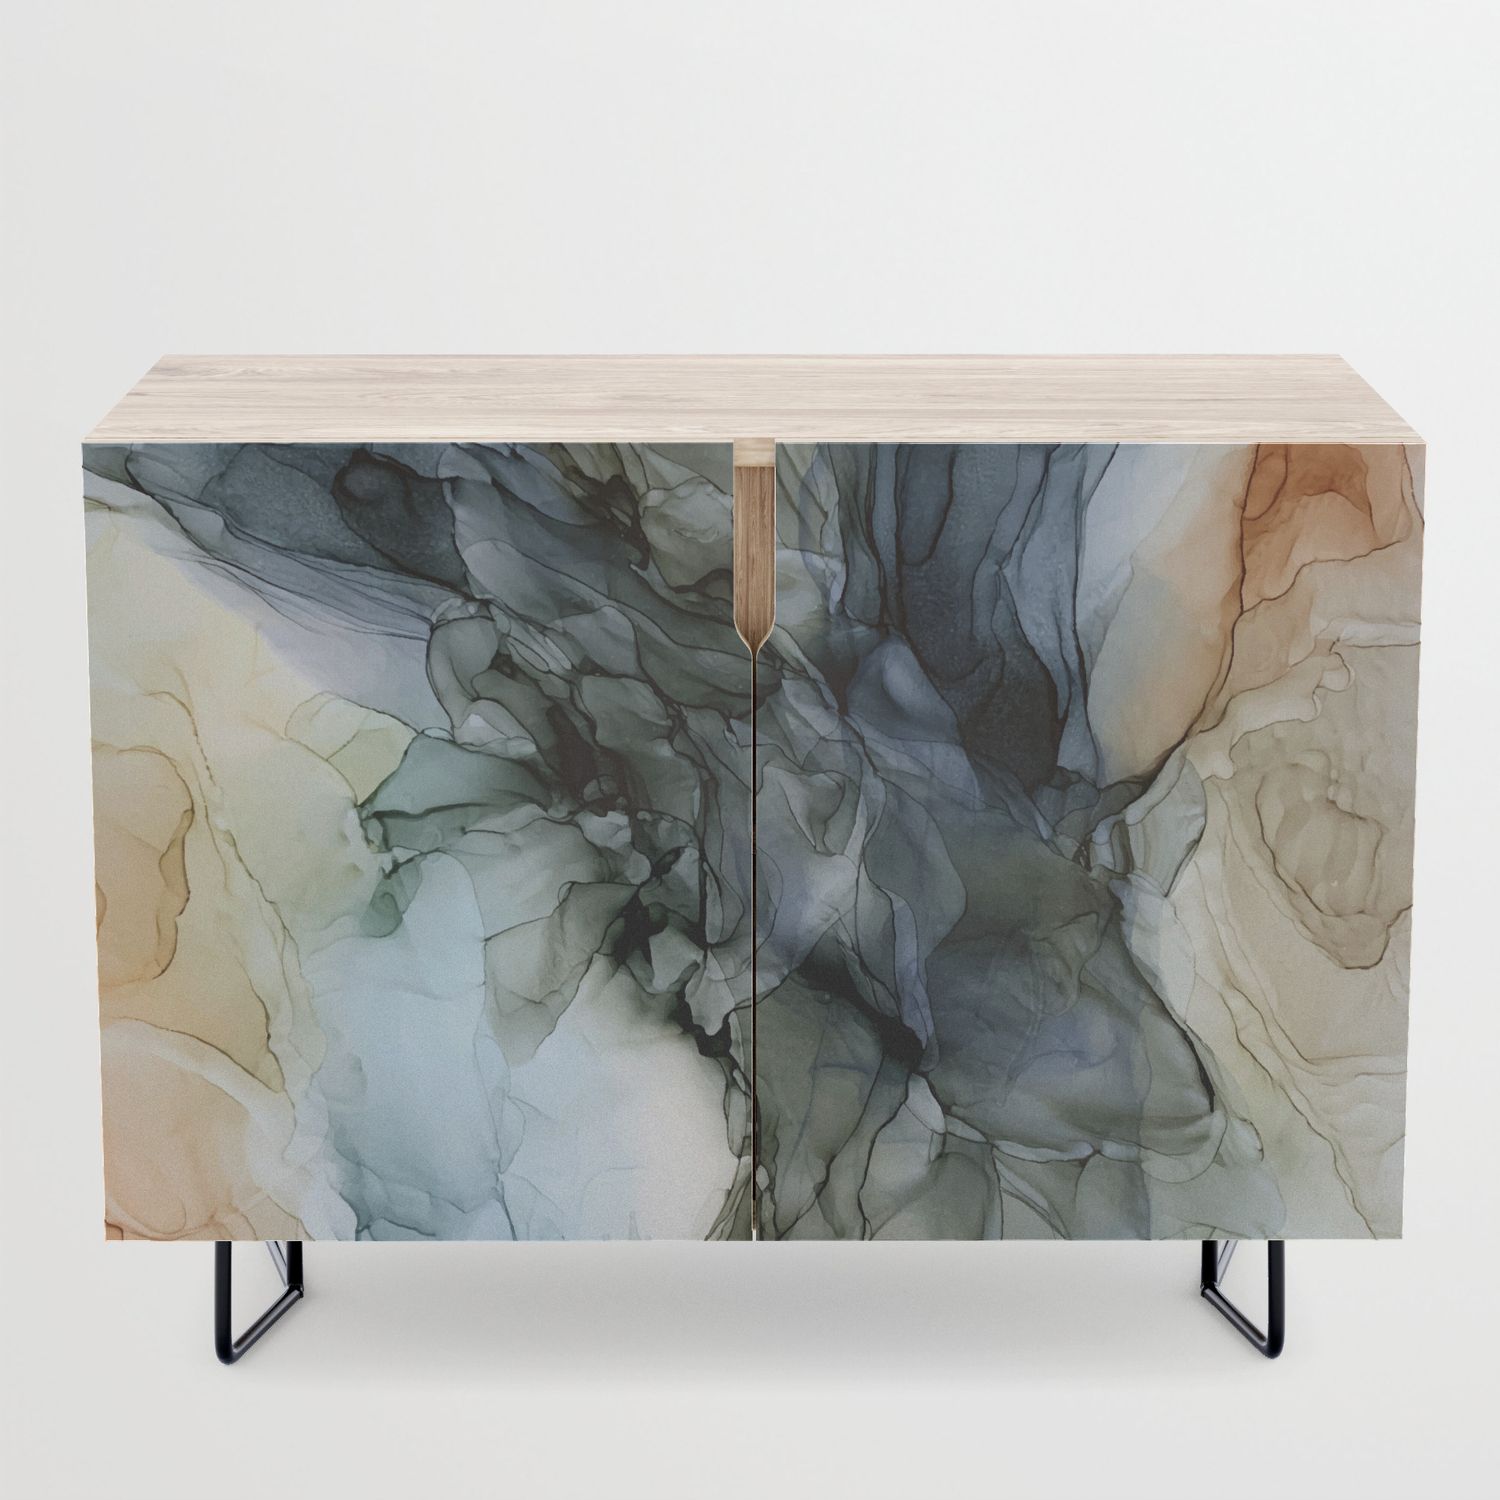 Southwestern Desert Abstract Landscape Inspired Credenza With Regard To Southwestern Credenzas (Gallery 1 of 20)